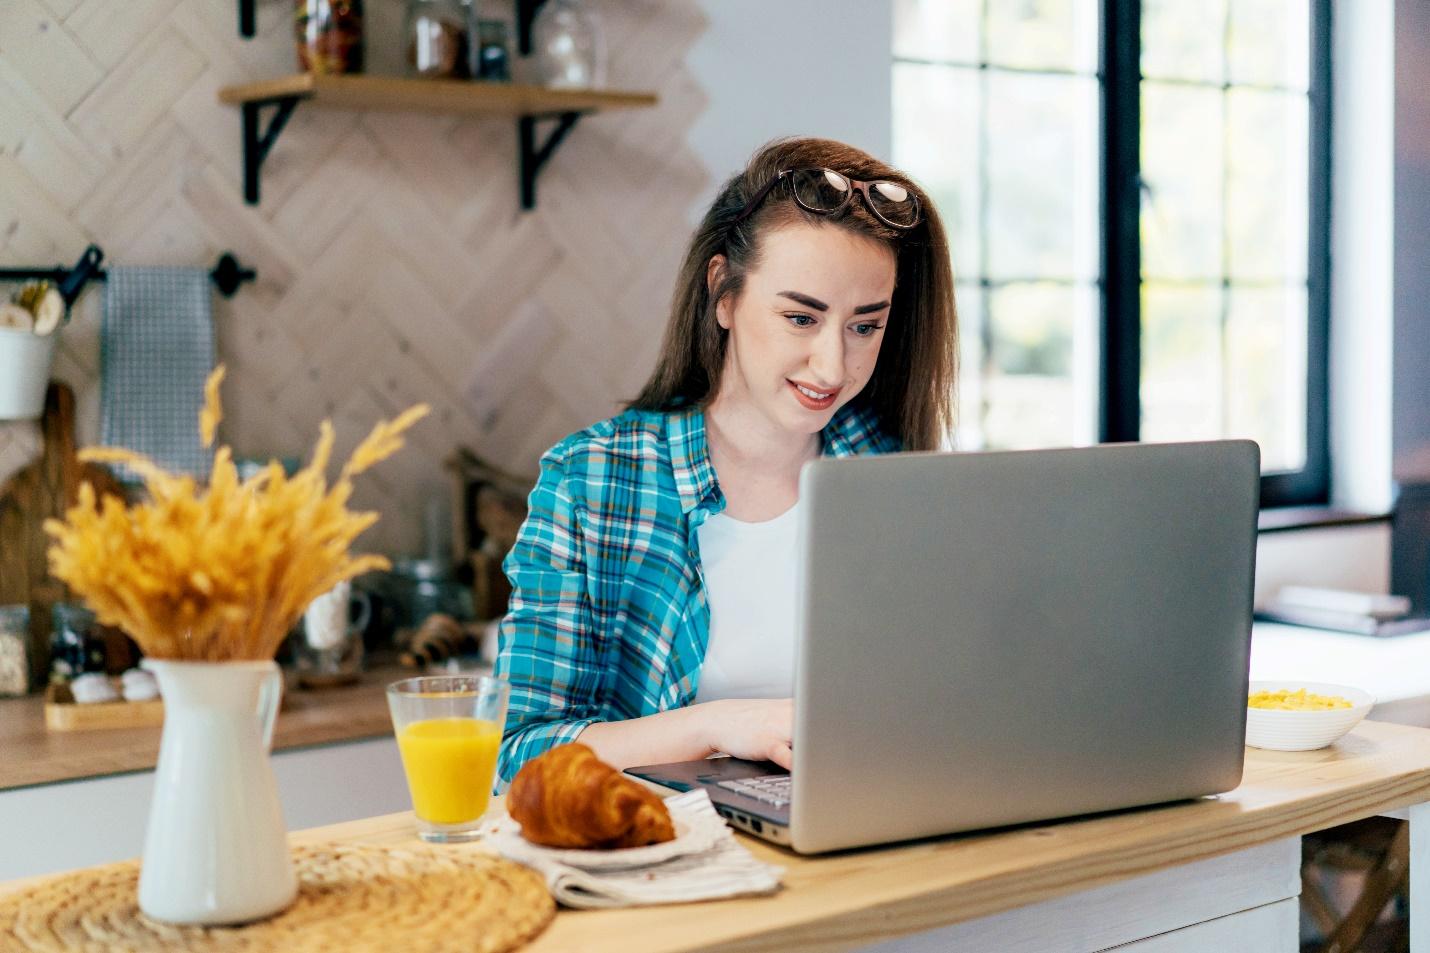 A casually dressed woman works at her laptop computer while eating breakfast at home.